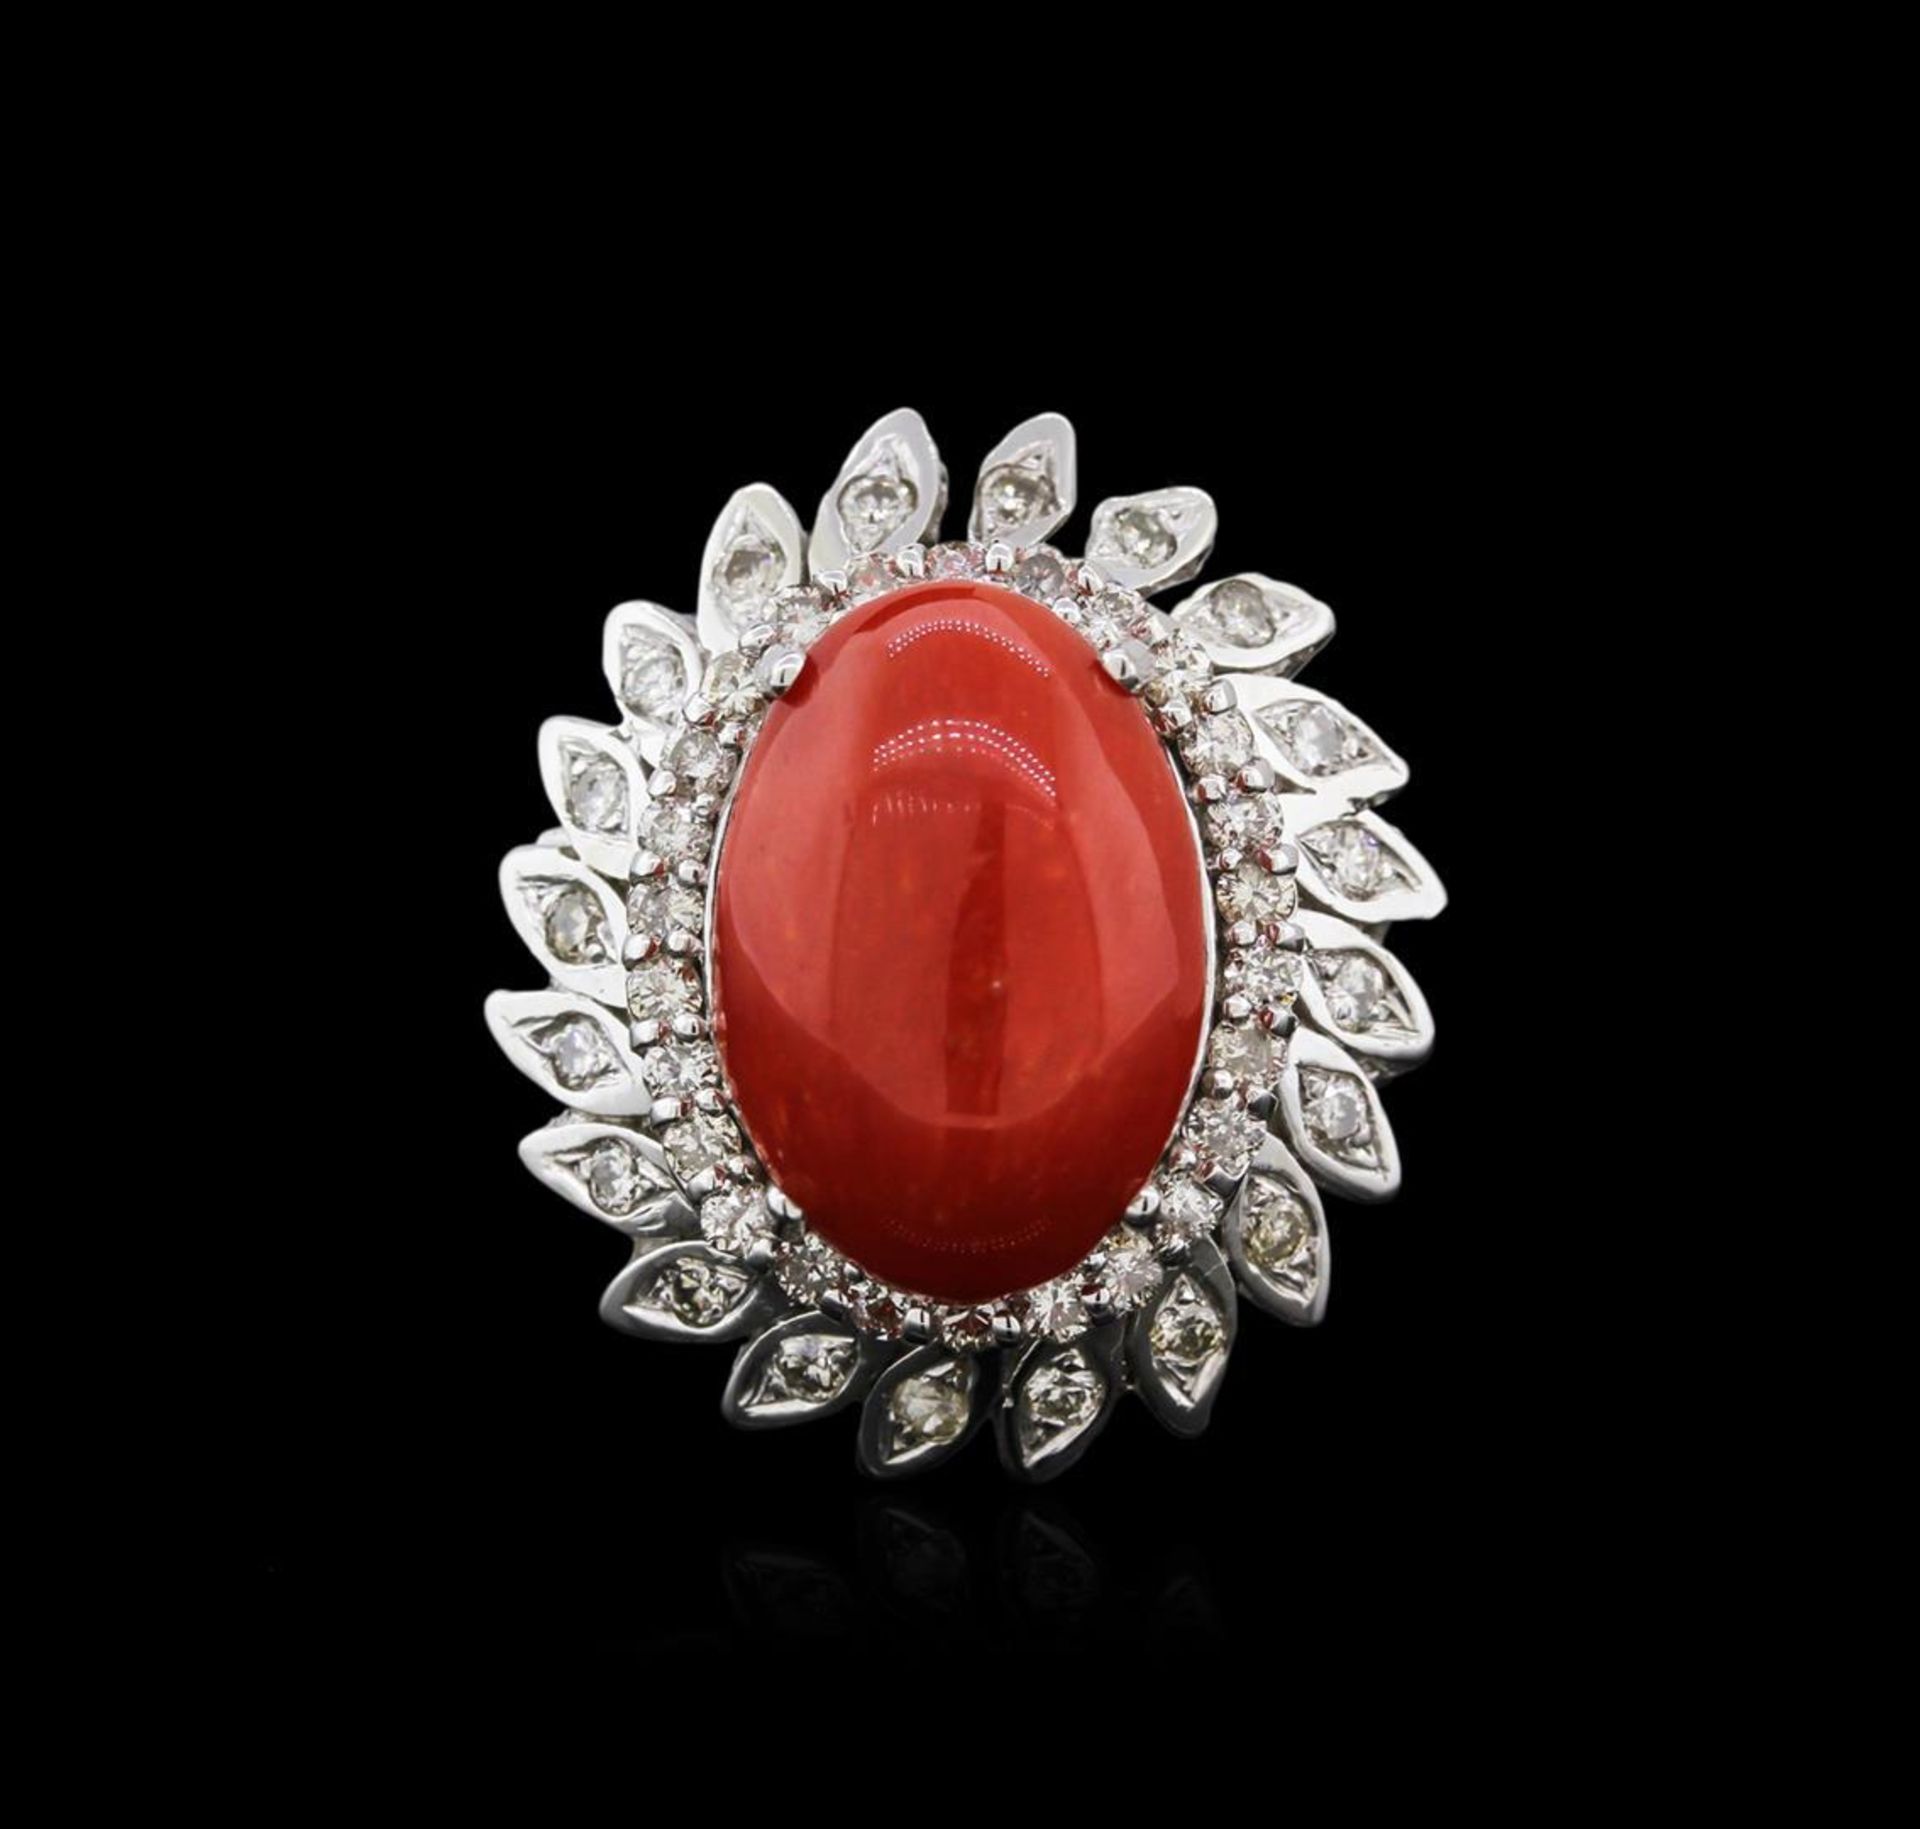 14KT White Gold 9.27 ctw Coral and Diamond Ring - Image 2 of 4